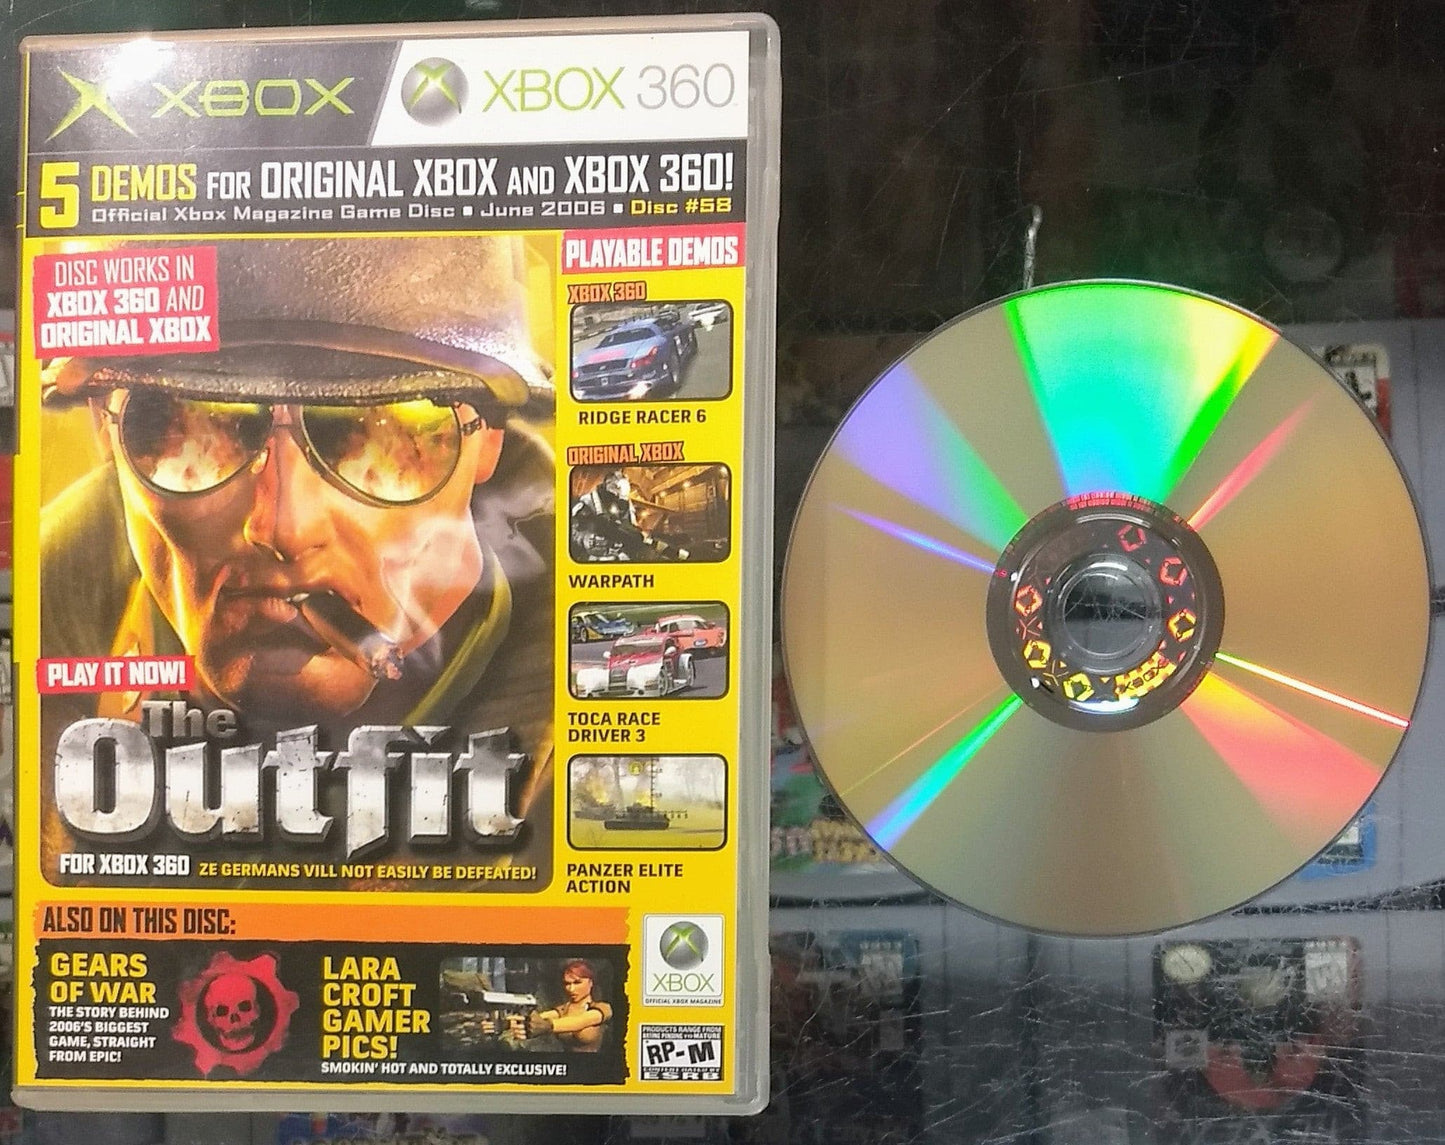 OFFICIAL XBOX MAGAZINE DEMO DISC 58 (XBOX 360 X360) - jeux video game-x